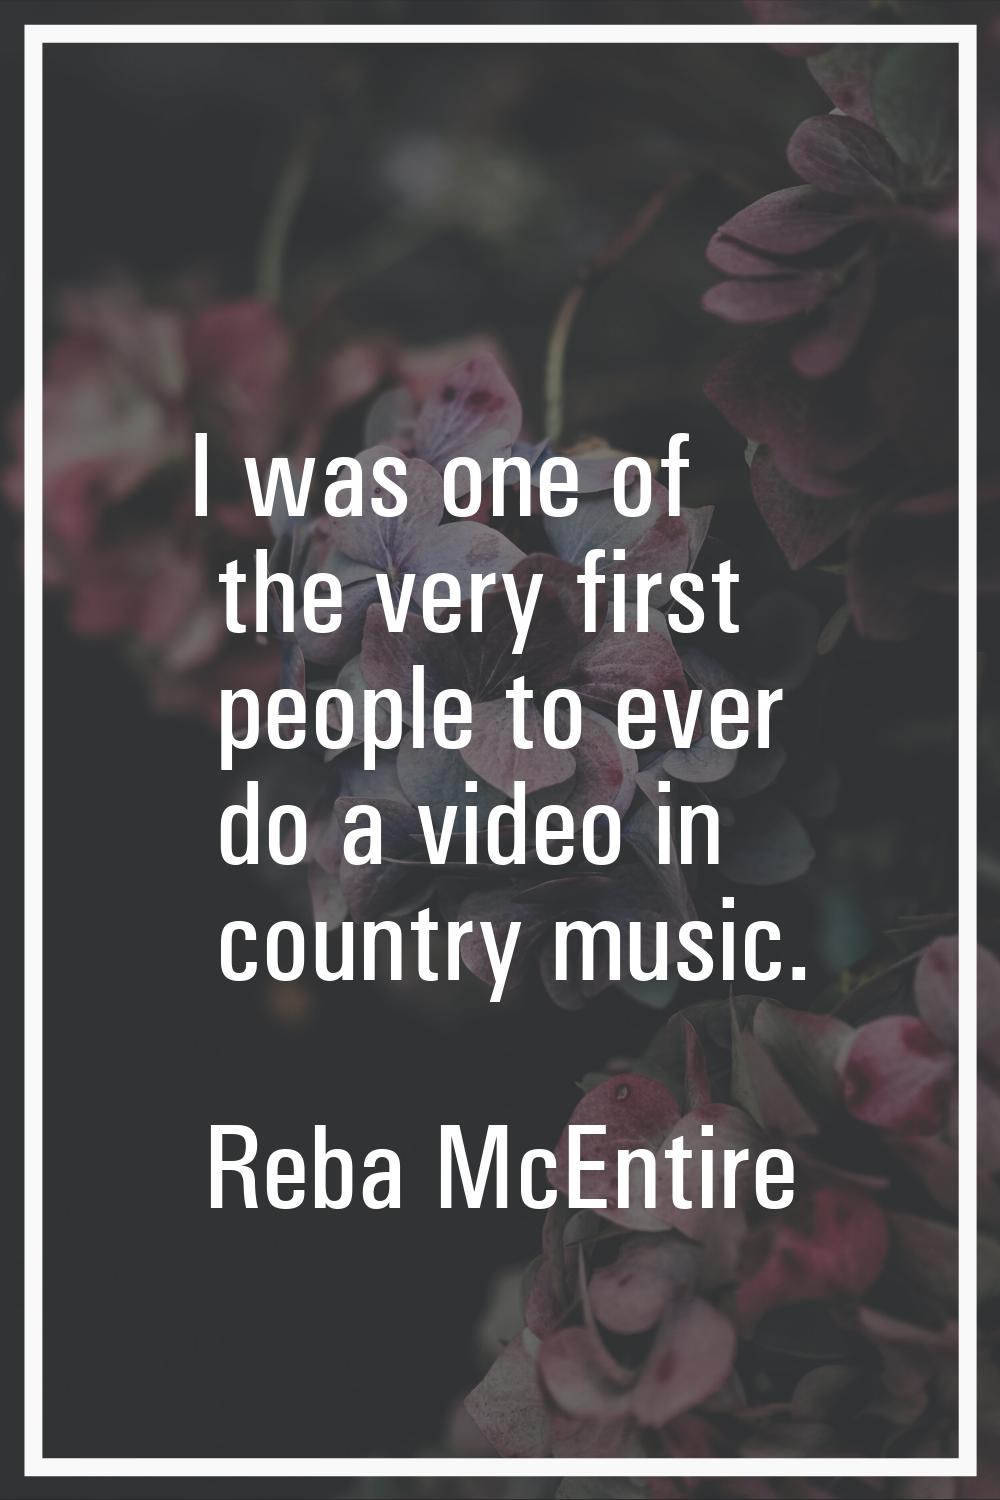 I was one of the very first people to ever do a video in country music.